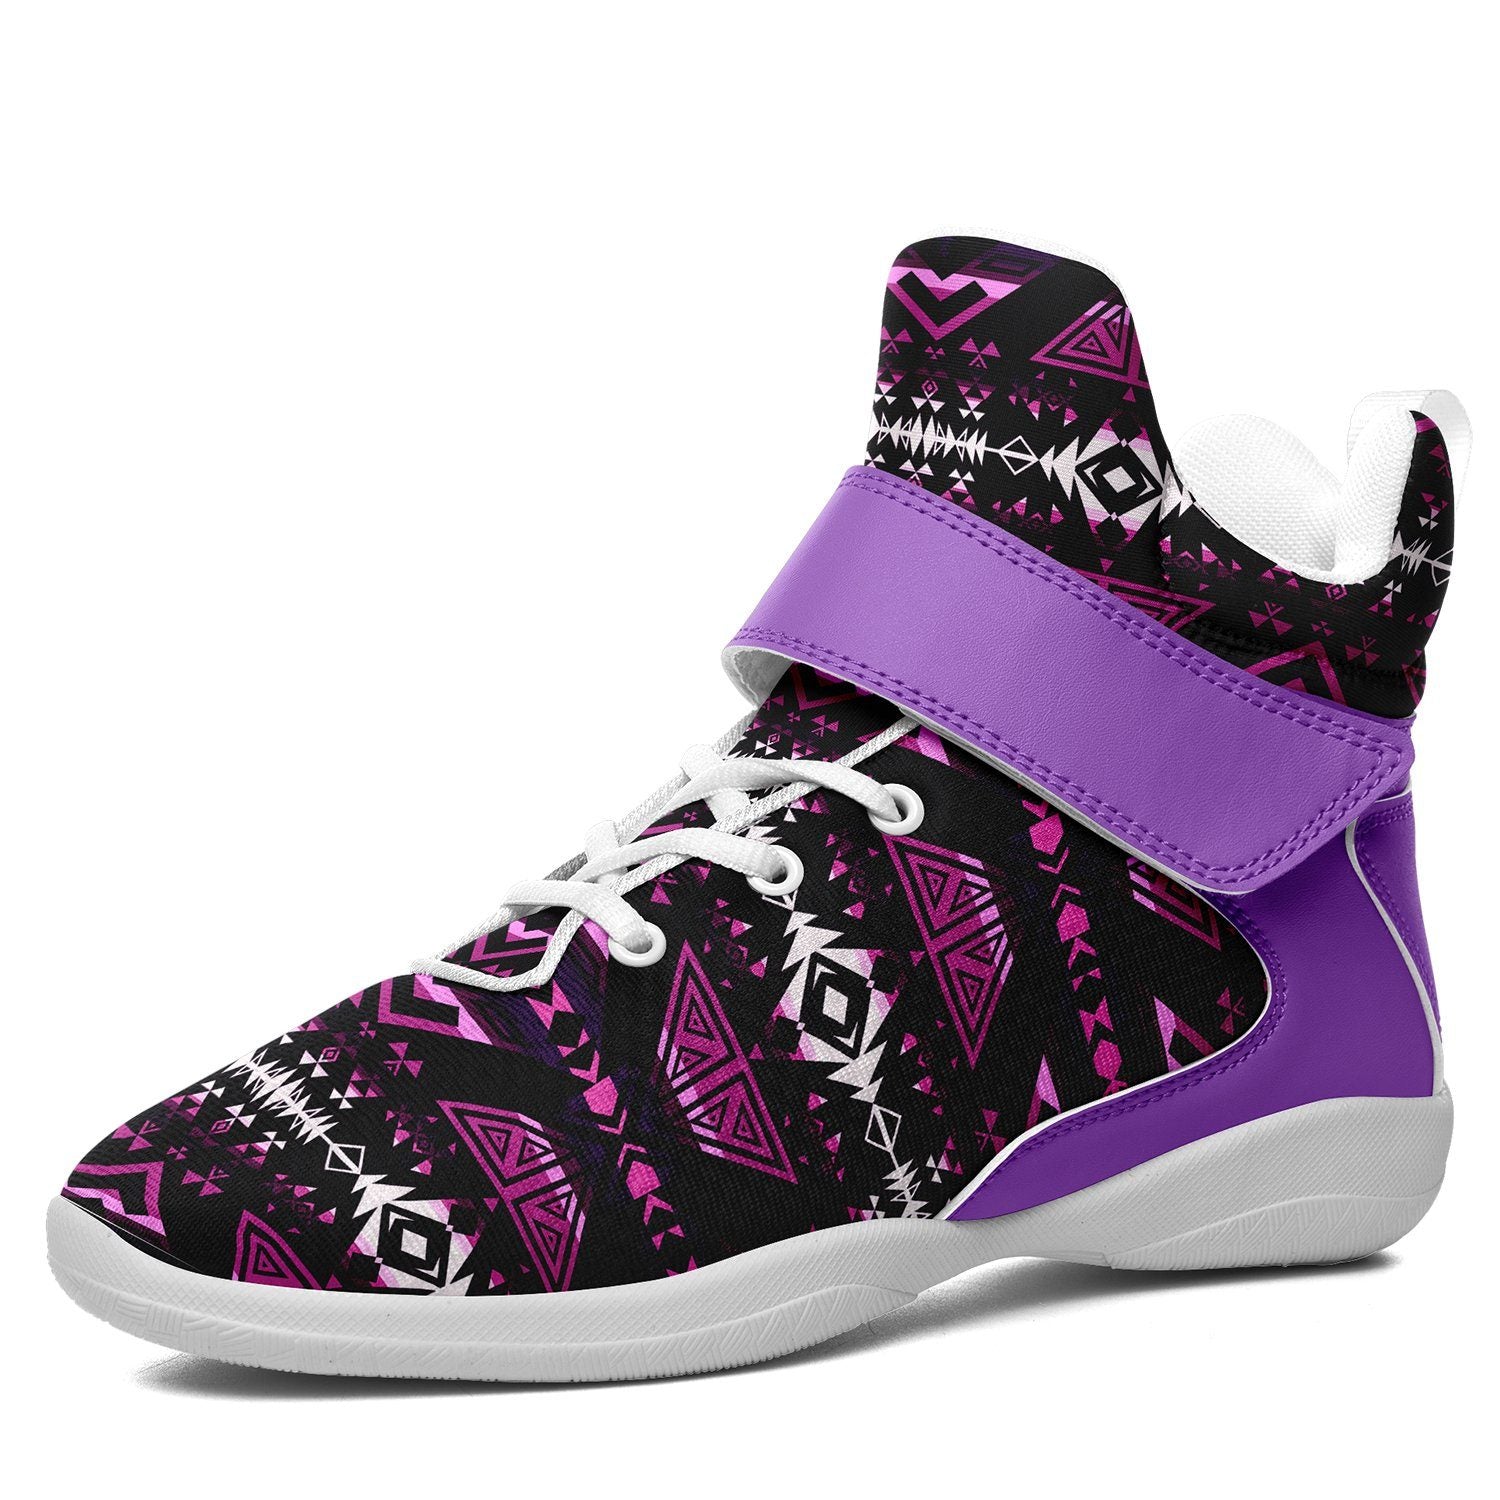 Upstream Expedition Moonlight Shadows Ipottaa Basketball / Sport High Top Shoes 49 Dzine US Women 4.5 / US Youth 3.5 / EUR 35 White Sole with Lavender Strap 